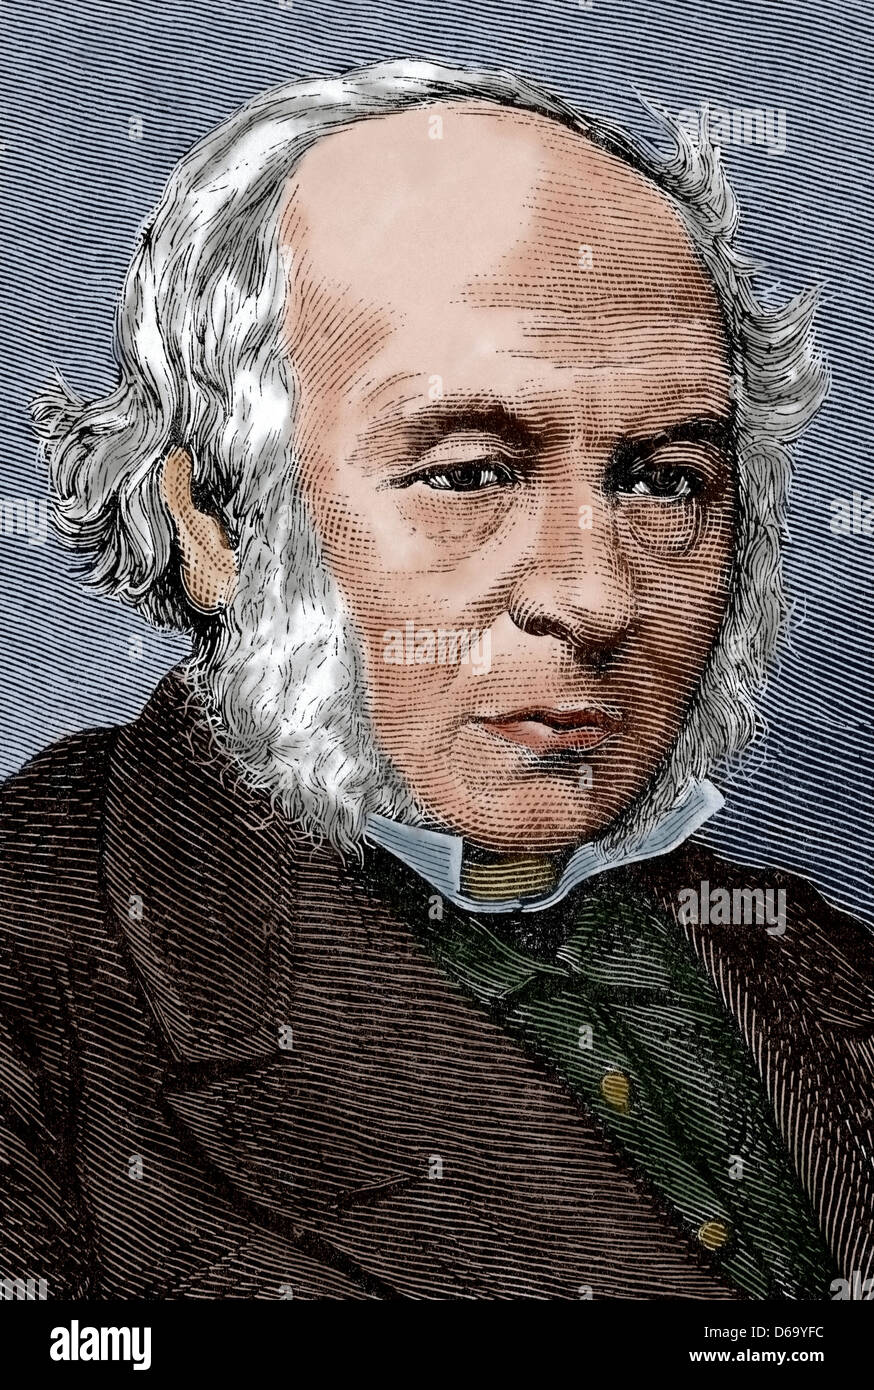 Rowland Hill (1795-1879). British teacher and creator of the first postage stamp, the Penny Black. Colored engraving. Stock Photo